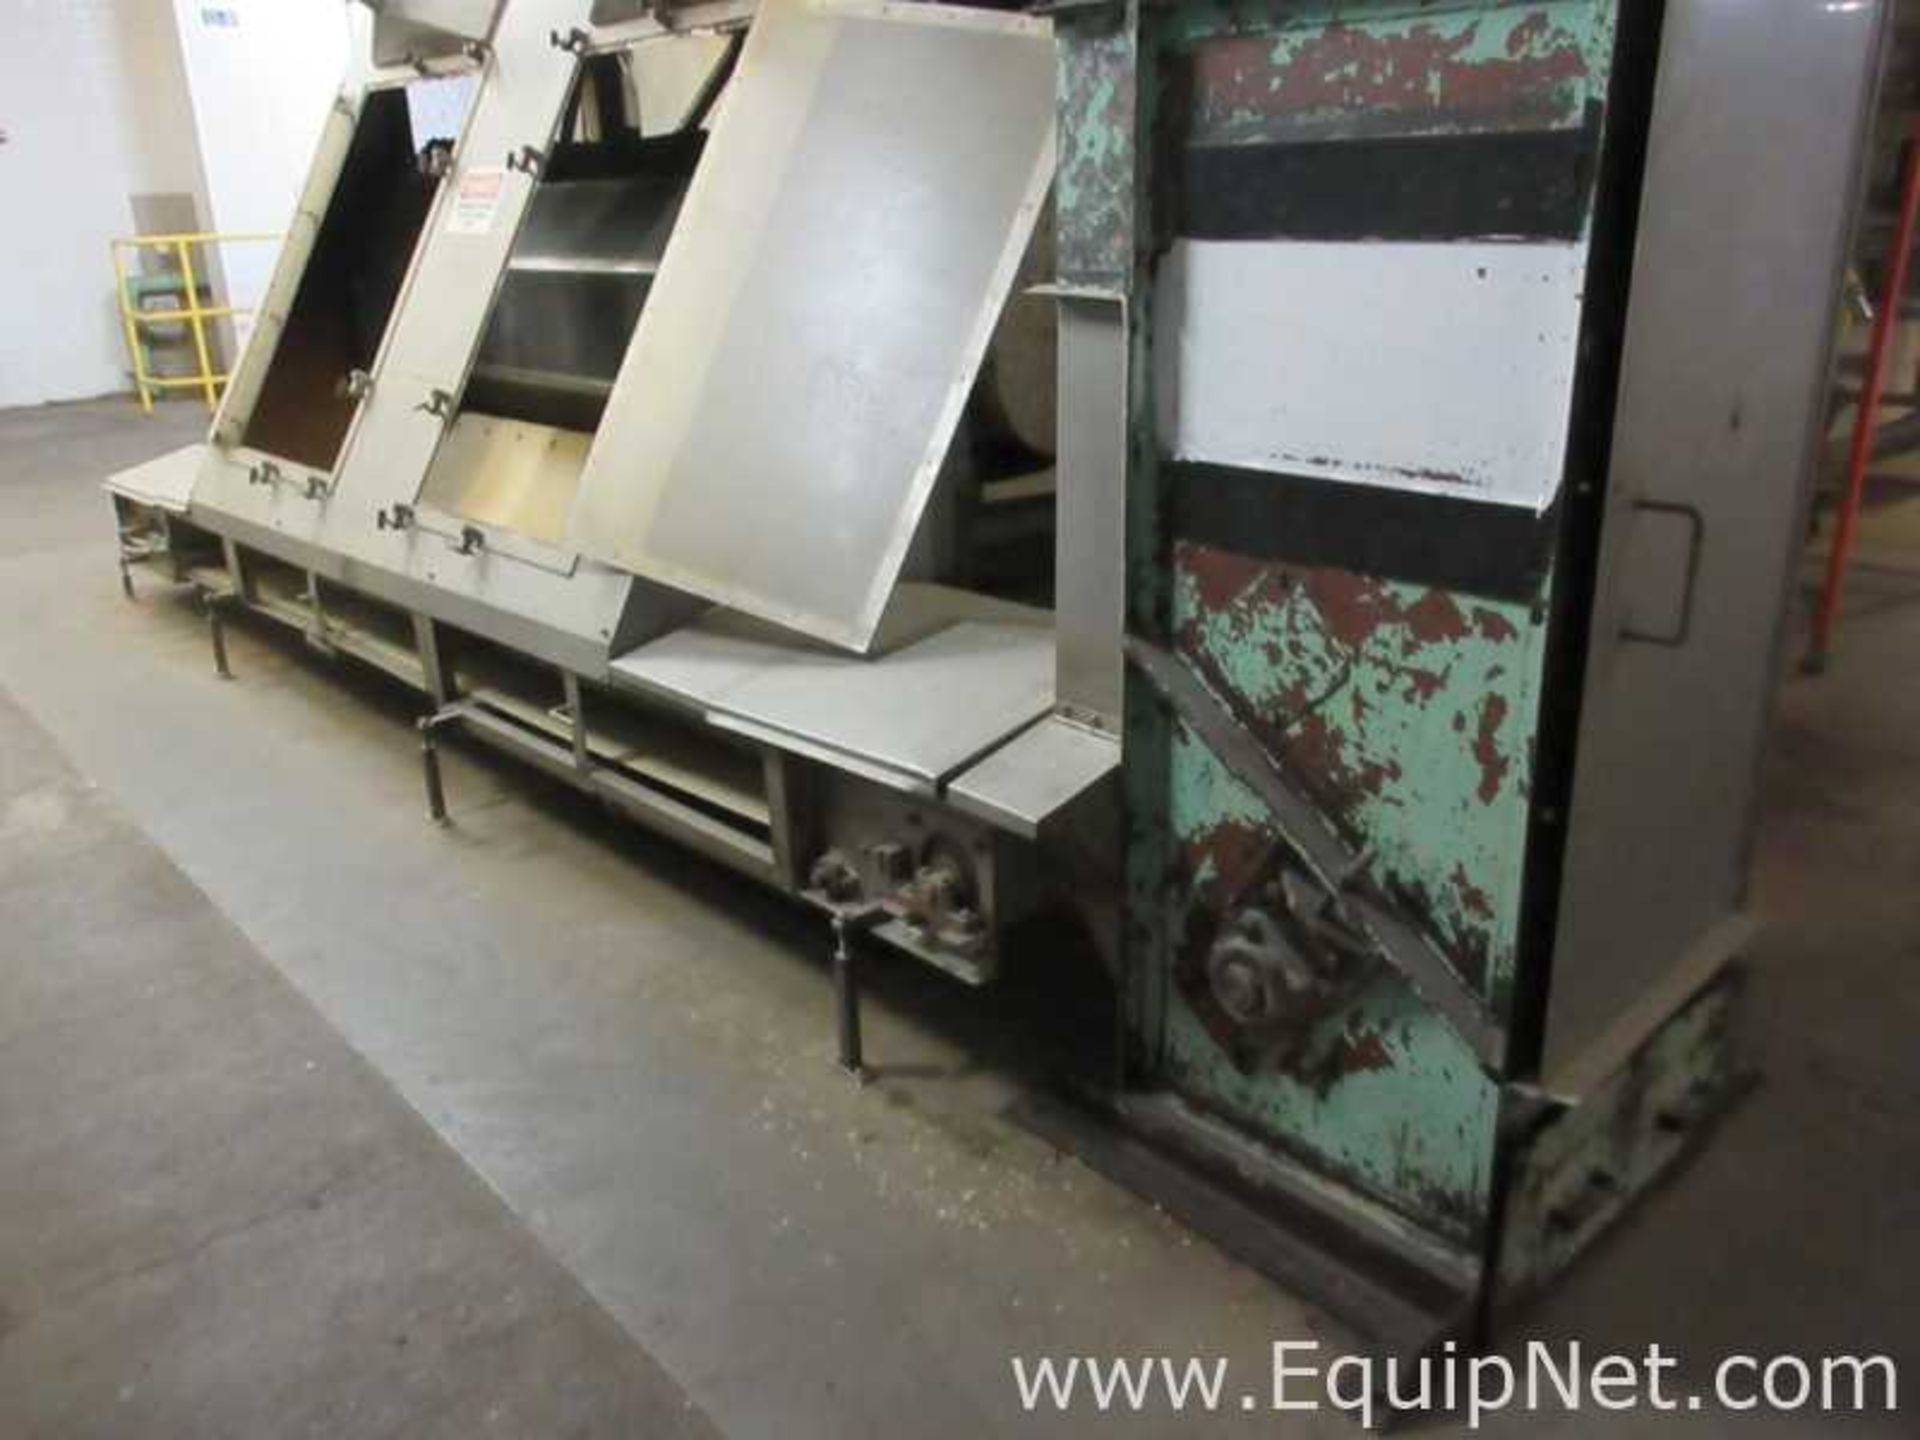 EQUIPNET LISTING #597061; REMOVAL COST: $0; DESCRIPTION: National Drying Machinery Belt - Image 9 of 27